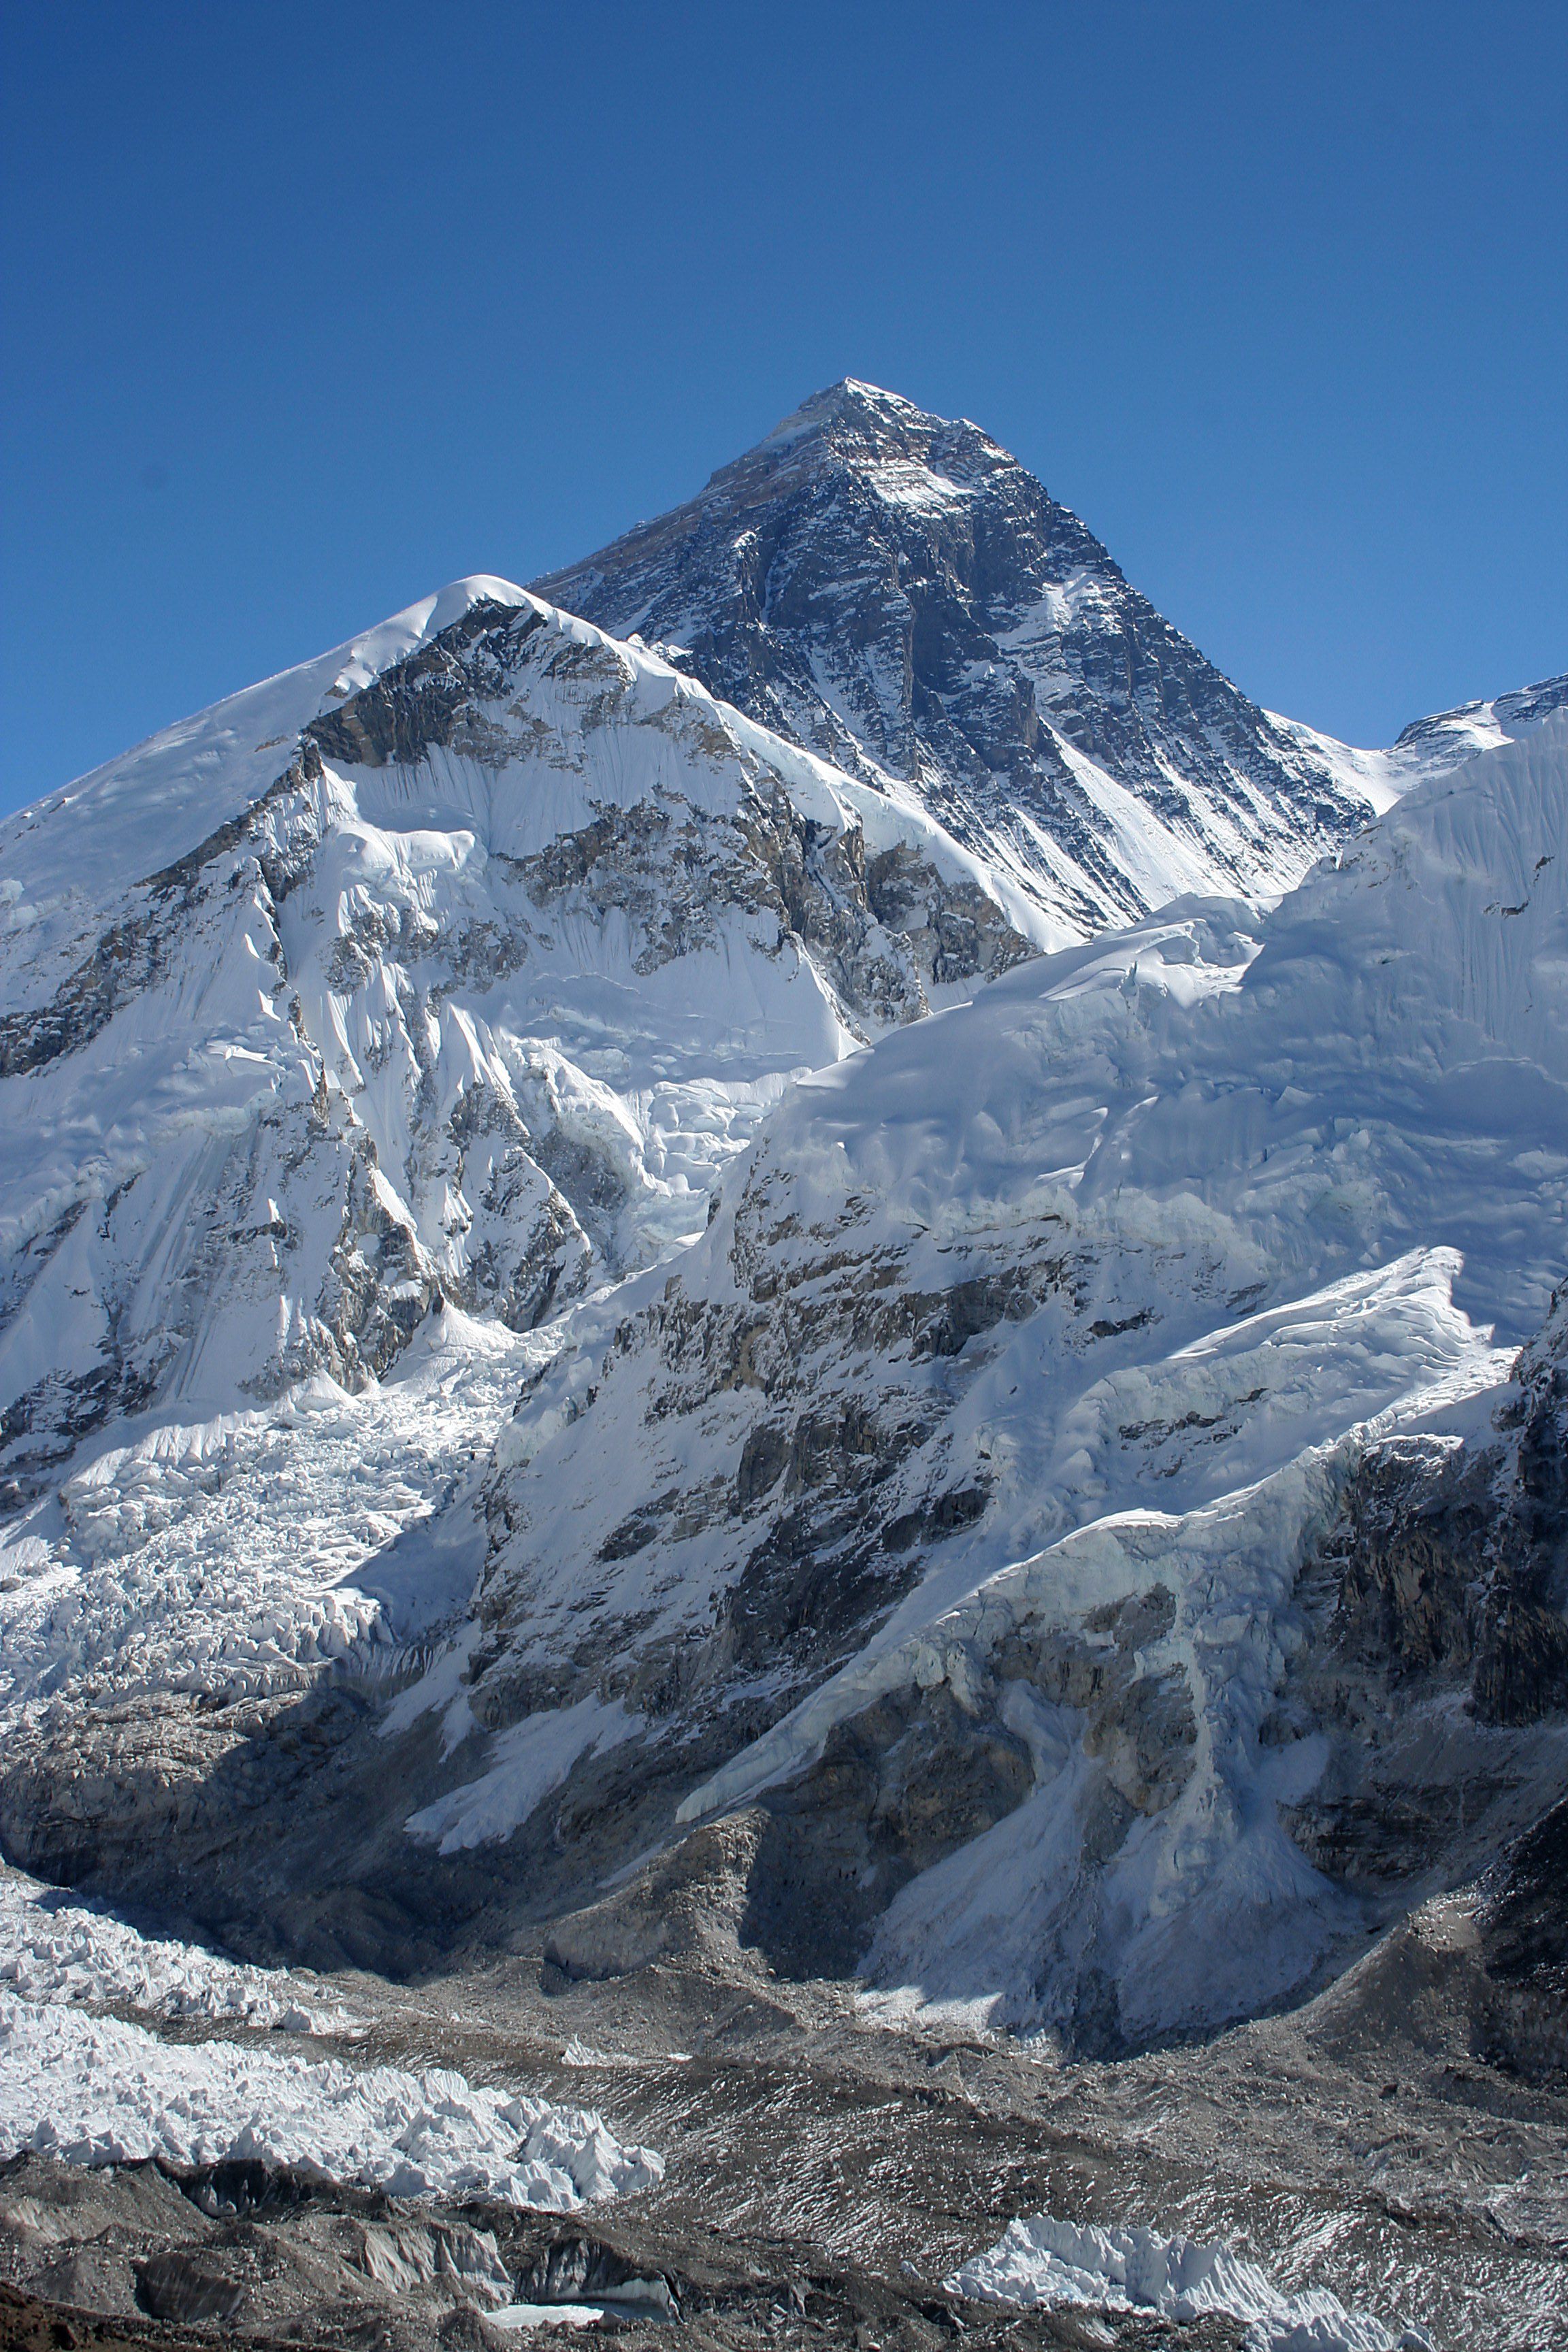 Sagarmatha Day being observed on May 29